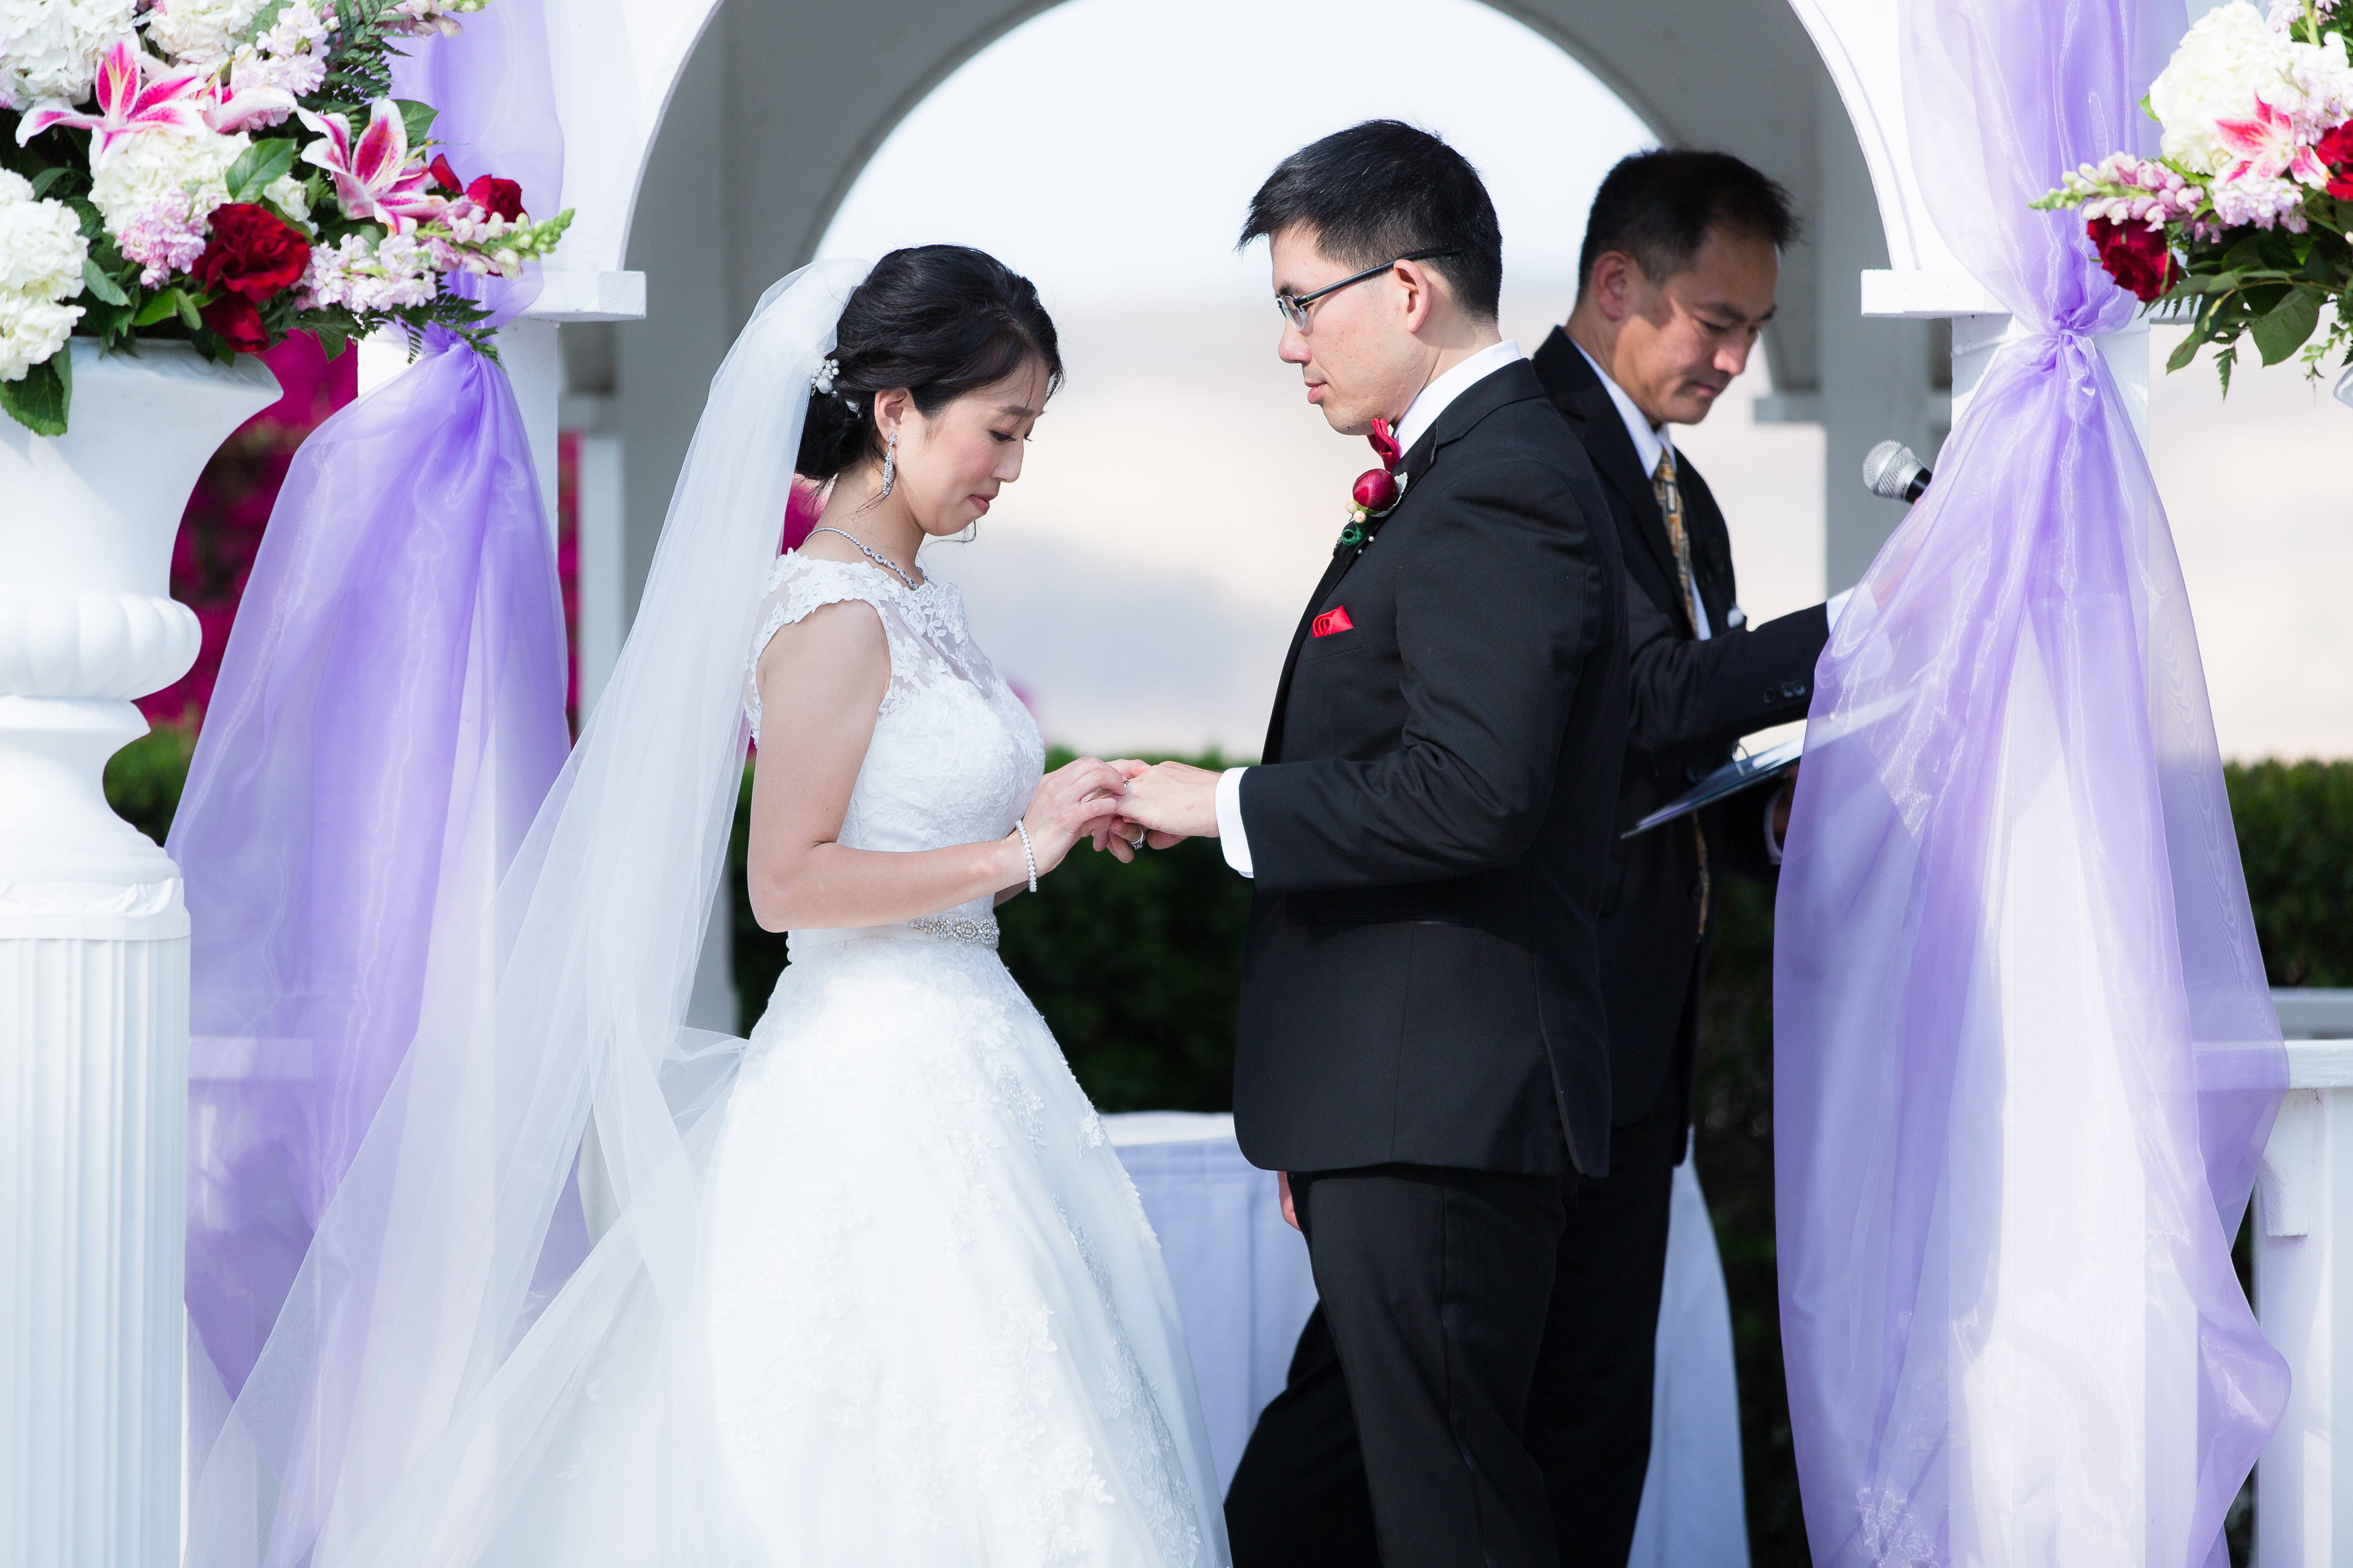 Bride putting ring on groom during wedding ceremony